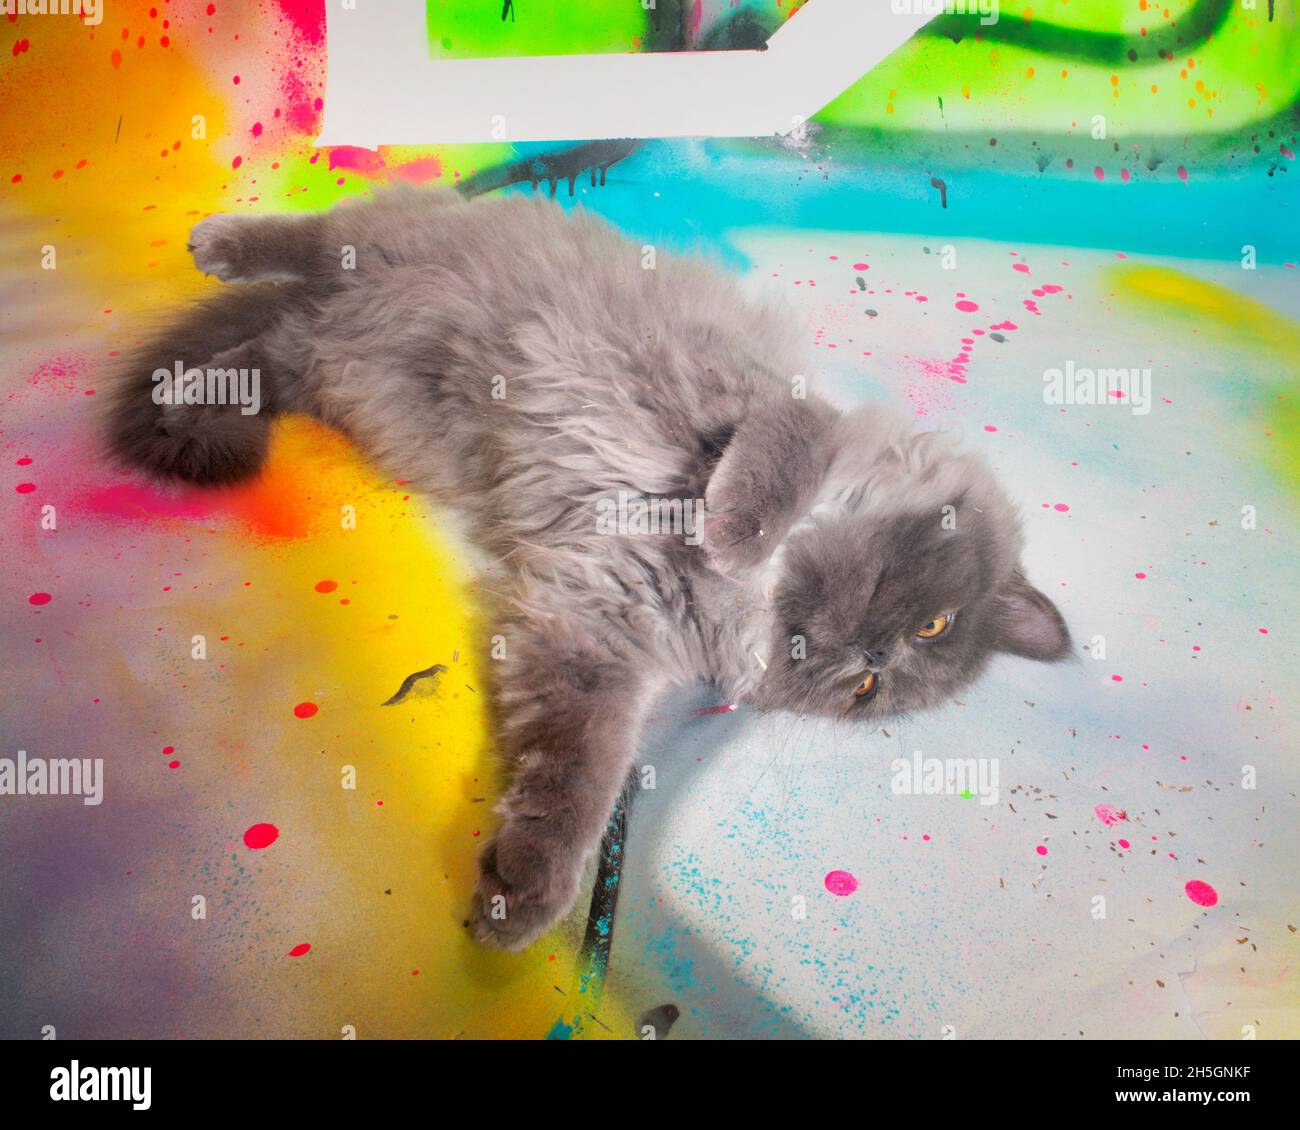 Funny fluffy grey kitten rolling around on his back, on a neon paint splattered surface. Stock Photo